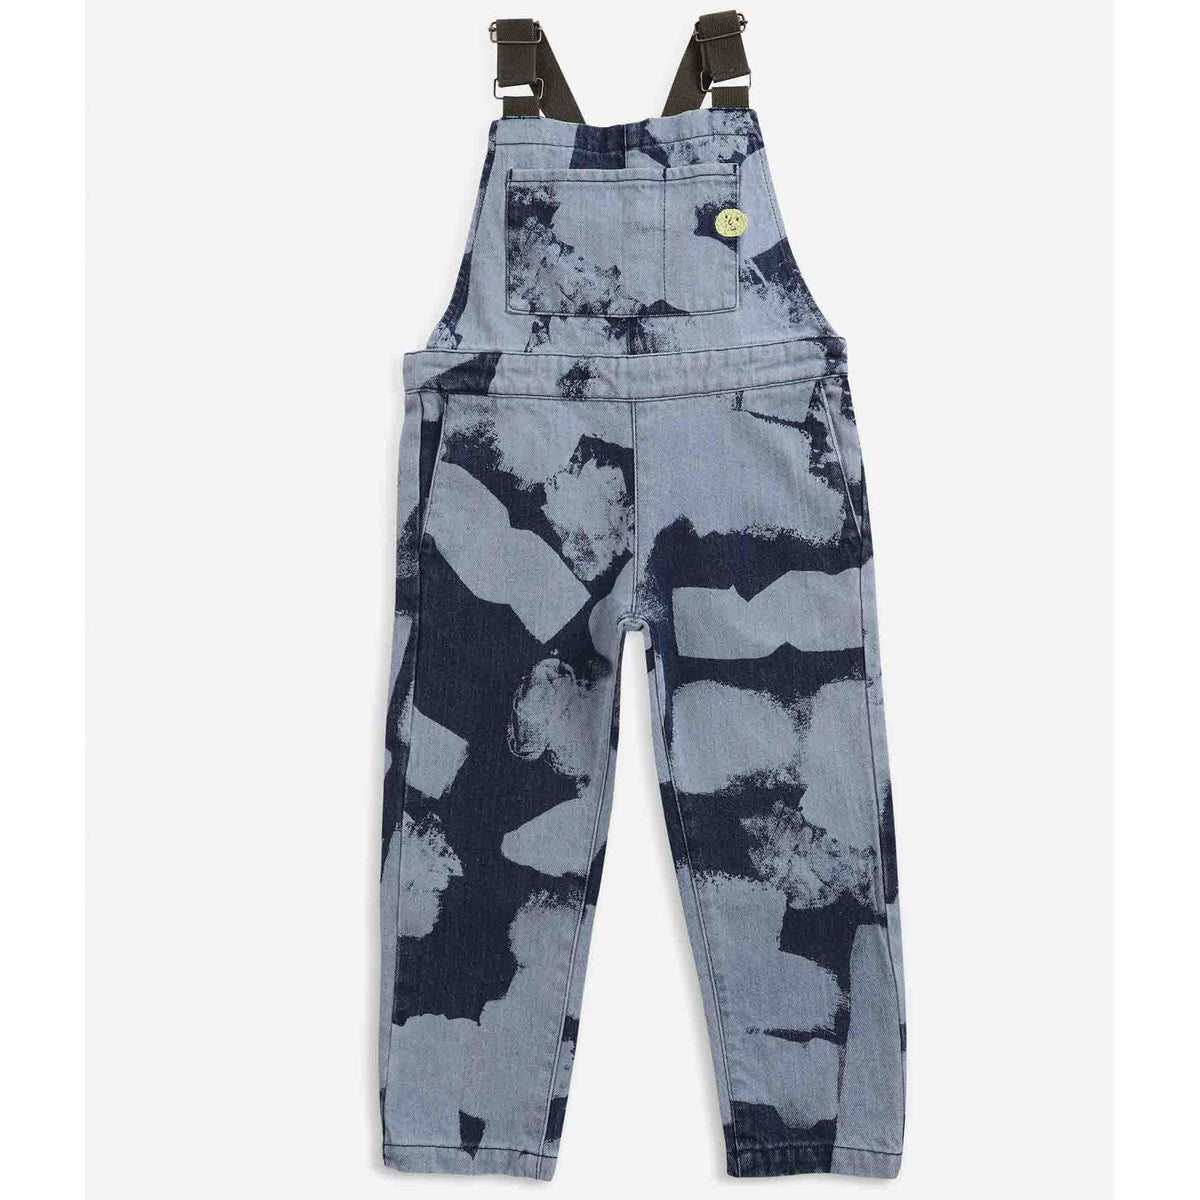 Bobo Choses - Painting All Over denim dungaree